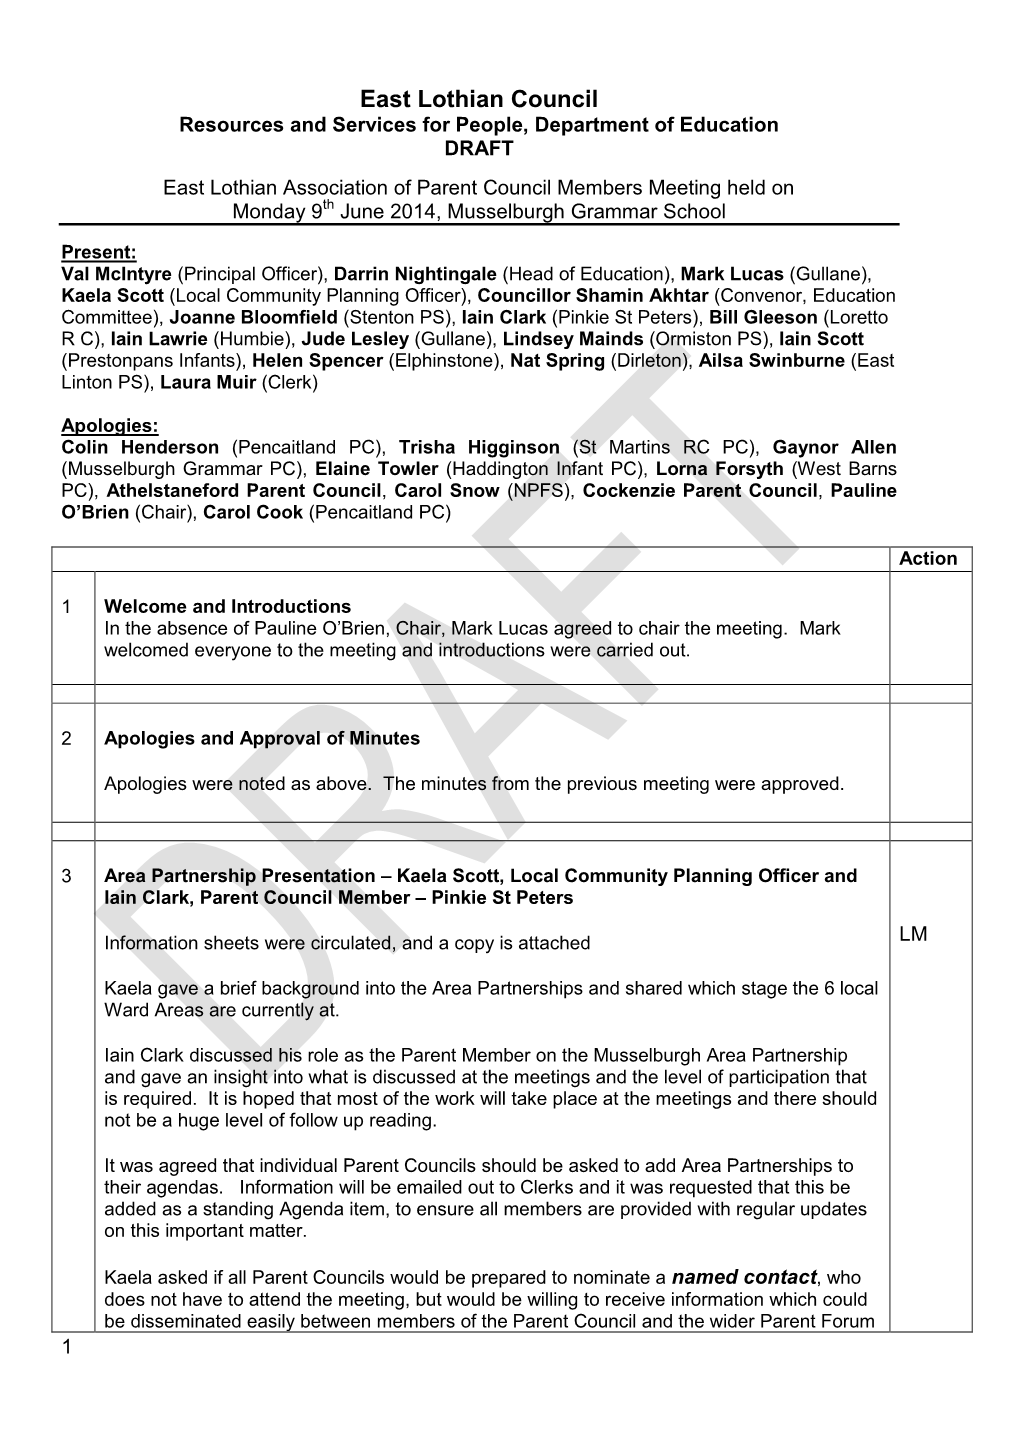 East Lothian Council Resources and Services for People, Department of Education DRAFT